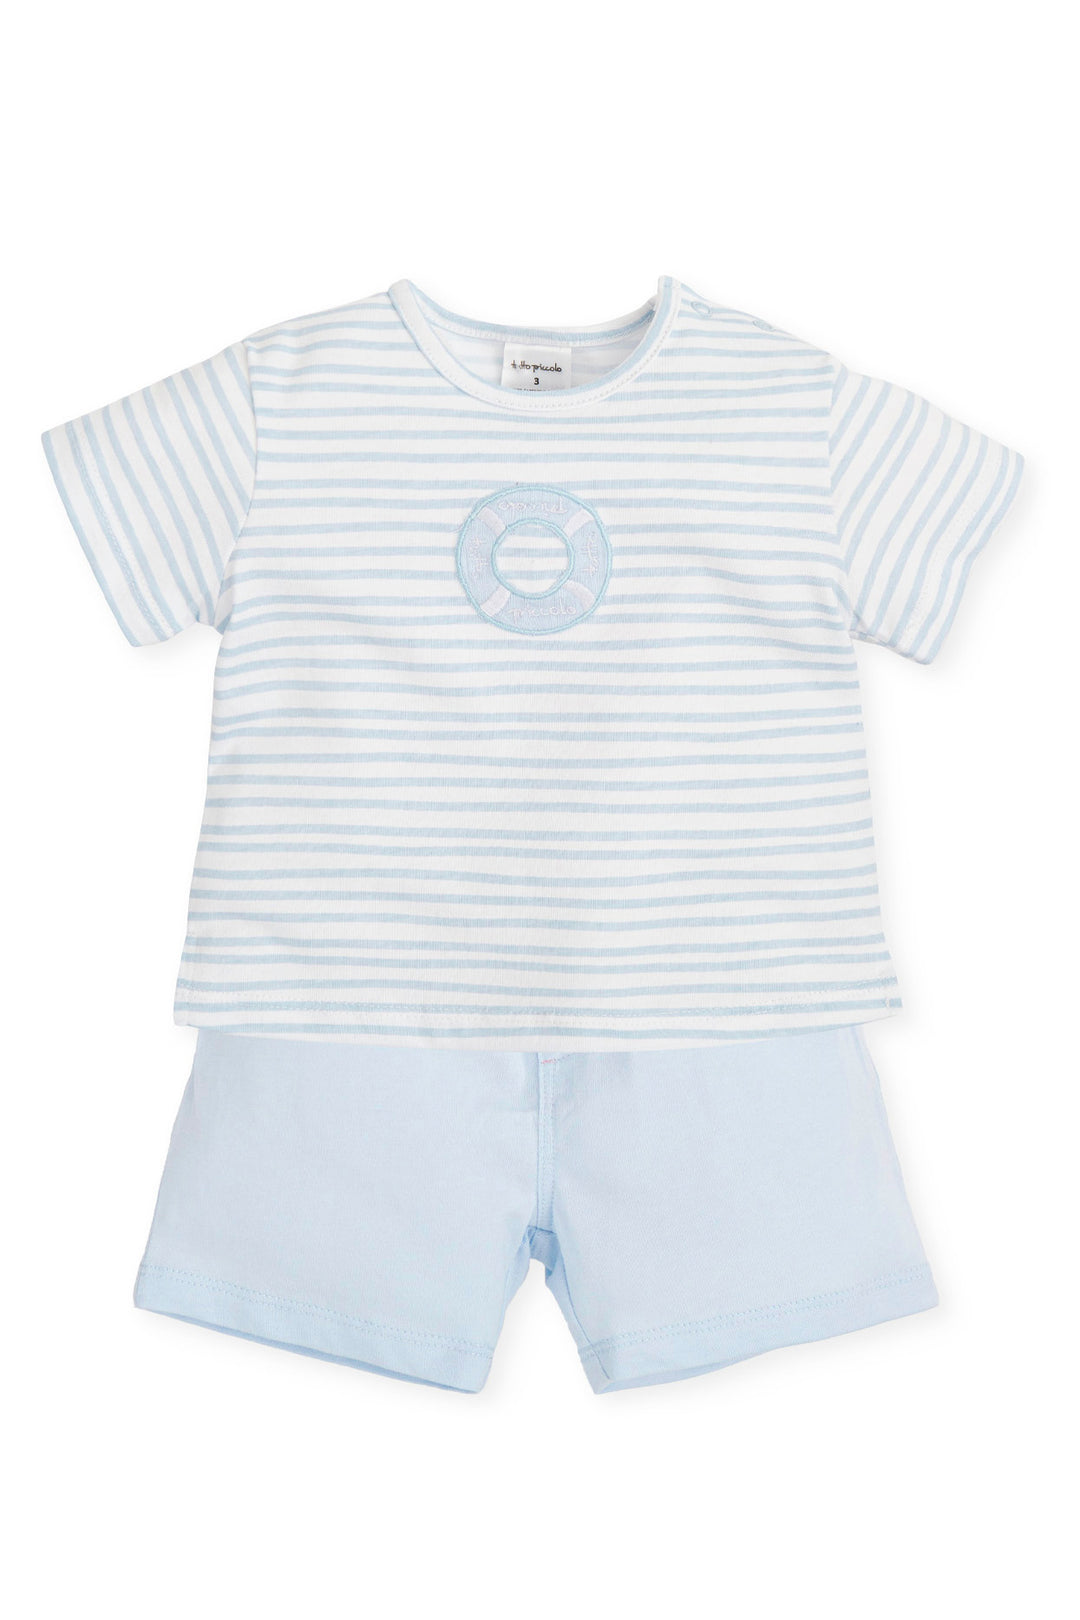 Tutto Piccolo "Casimir" Blue Stripe T-Shirt & Shorts | iphoneandroidapplications